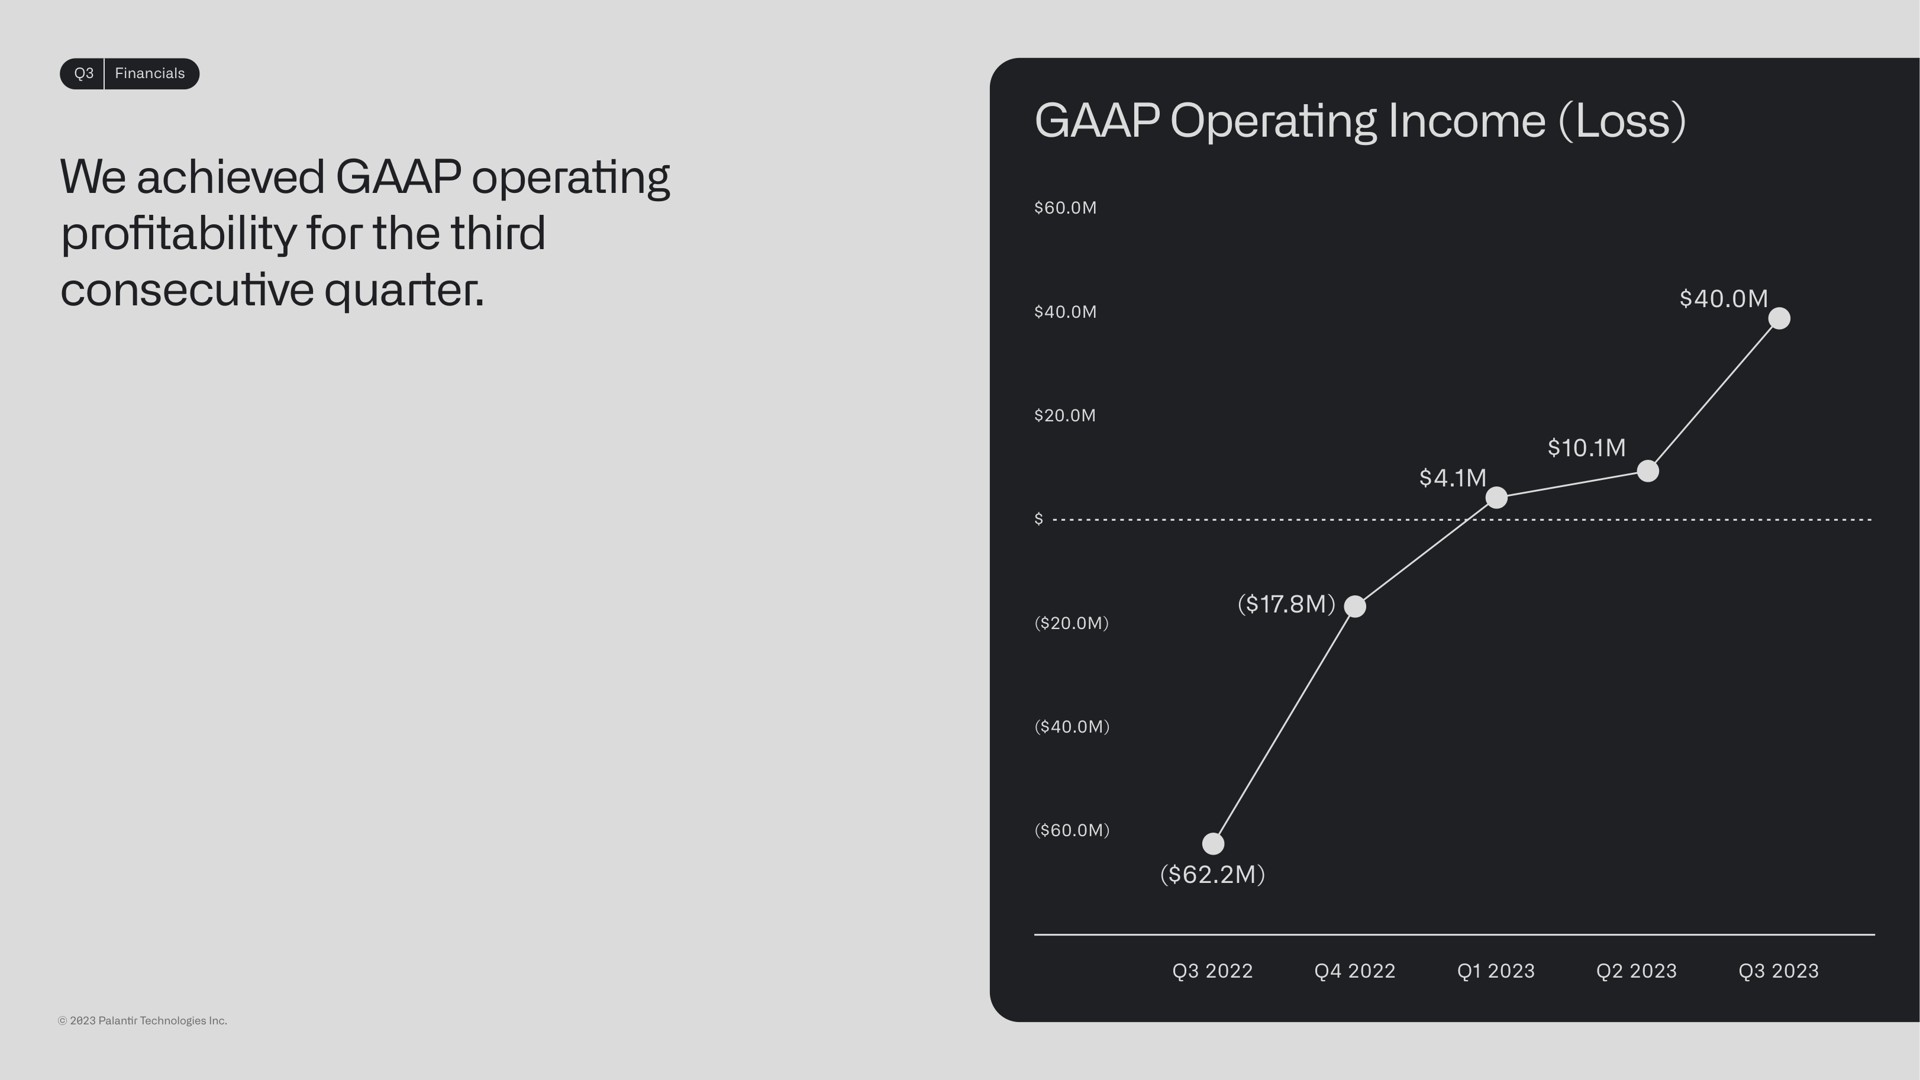 we achieved operating pro for the third consecutive quarter operating income loss profitability | Palantir